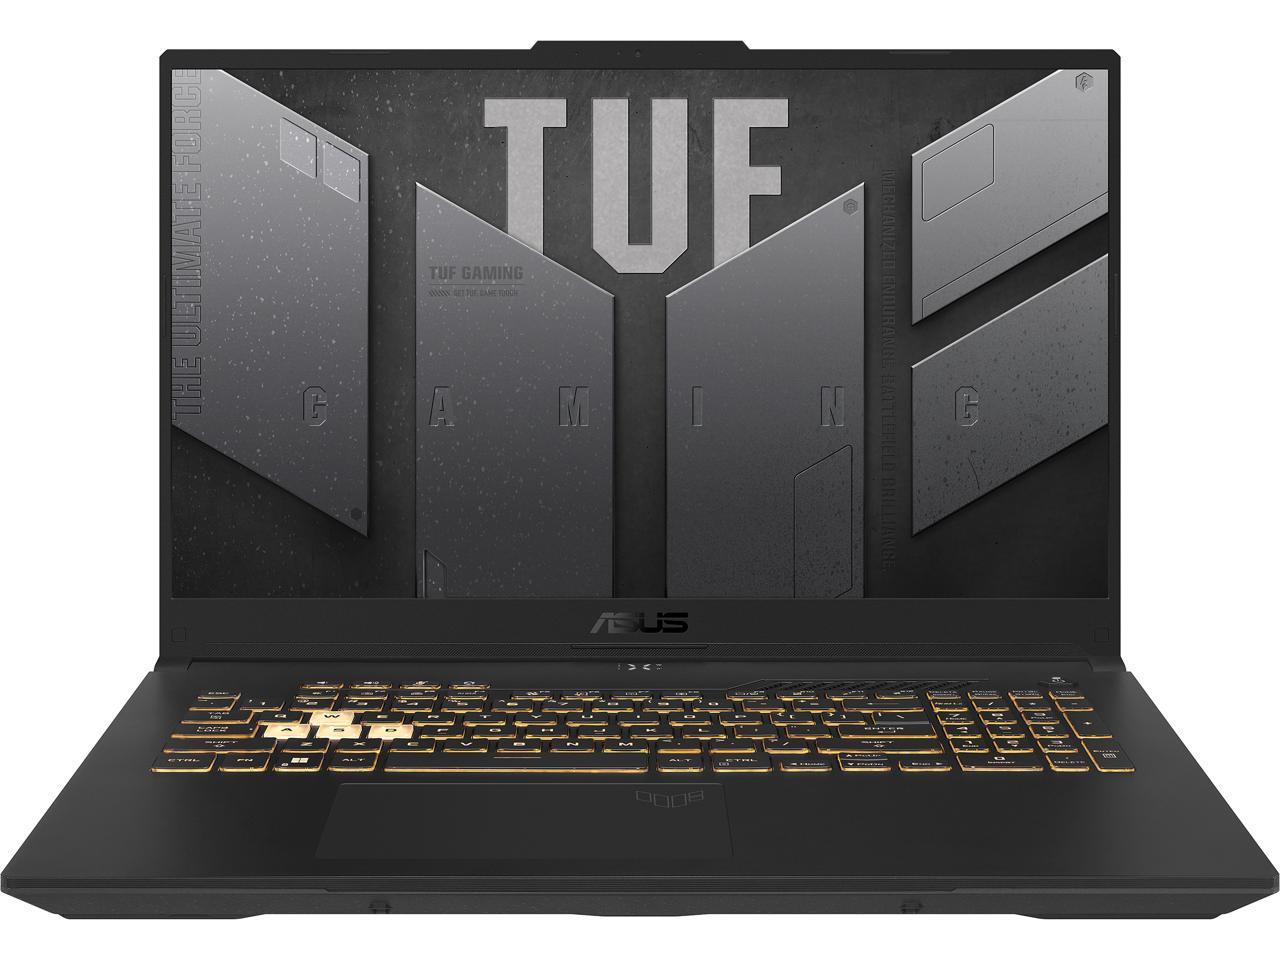 ASUS TUF Gaming F17 Gaming Laptop, 17.3" 144Hz FHD IPS-Type Display, Intel Core i7-12700H Processor, GeForce RTX 3060, 16GB DDR5 RAM, 1TB PCIe SSD, Wi-Fi 6, Windows 11 Home, FX707ZM-RS74